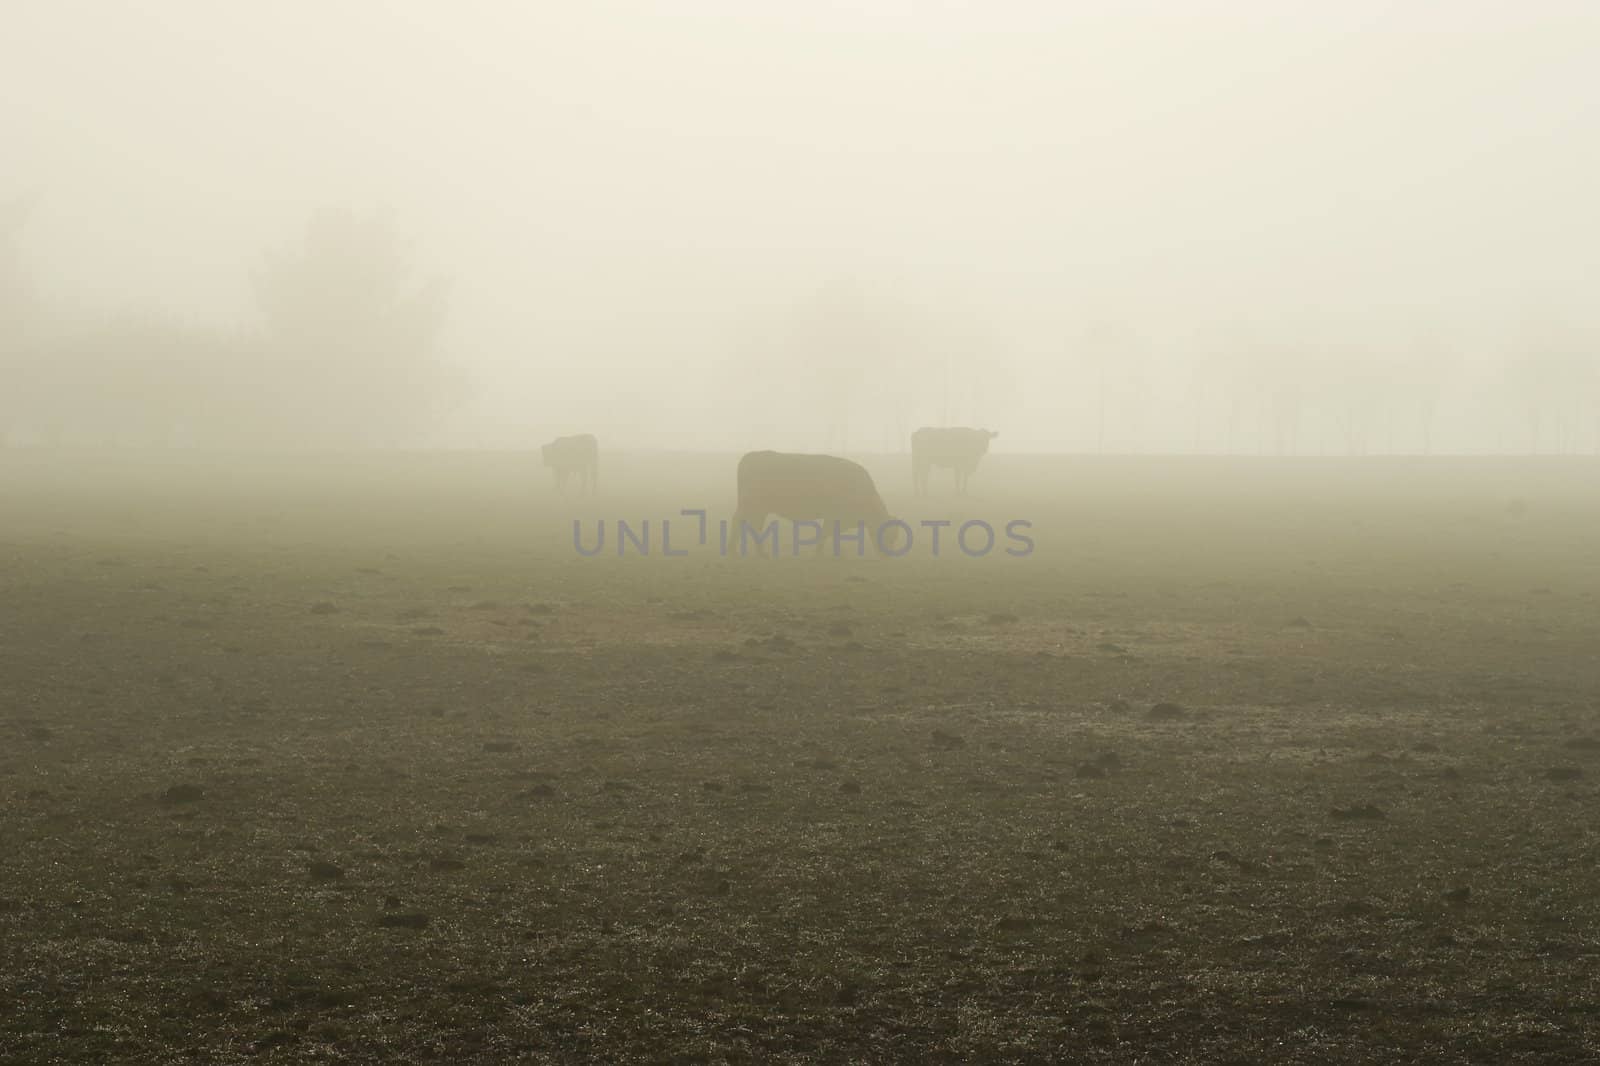 Three cows stands in a bare field on a foggy morning. Haumoana, Hawke's Bay, New Zealand.